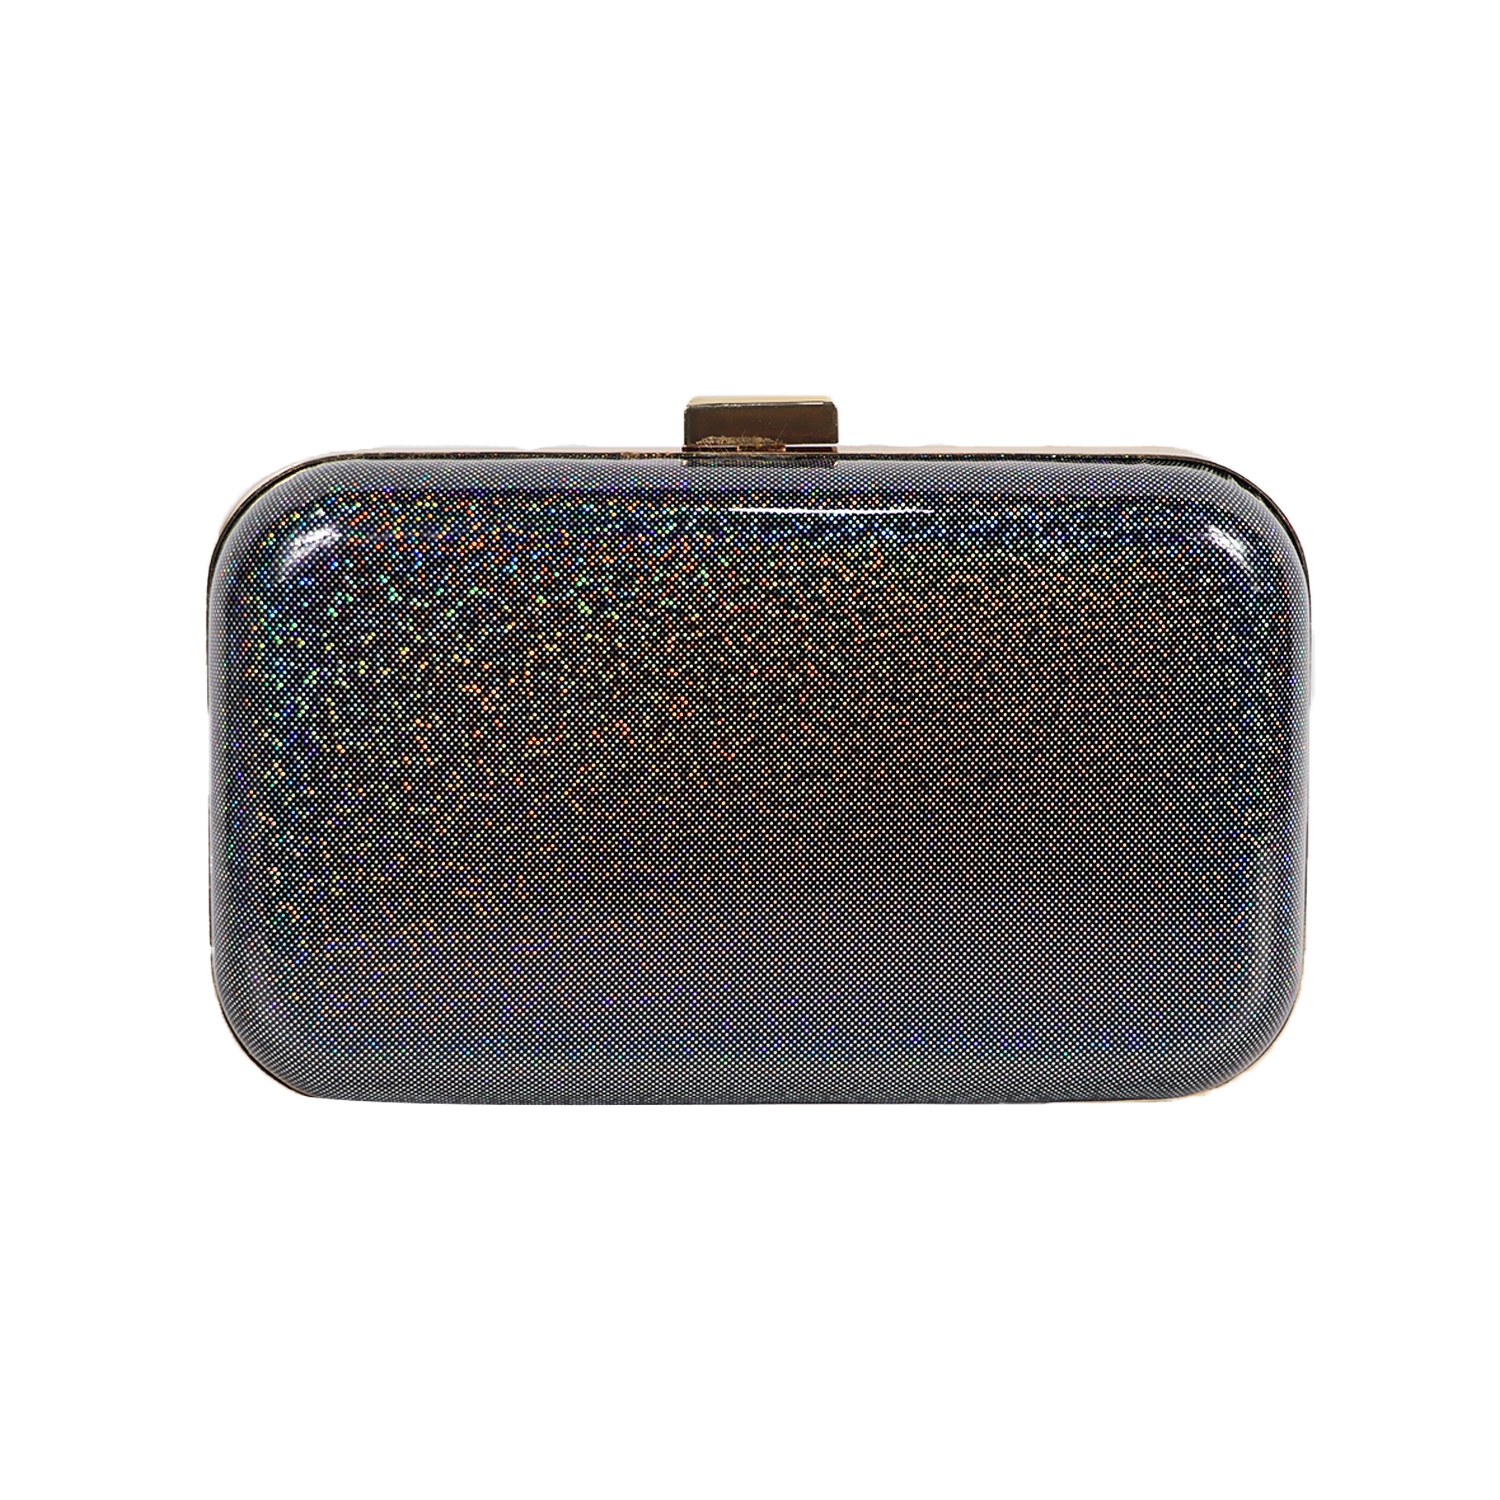 EMM | Black Shimmer Box Clutch with Chain Strap 2